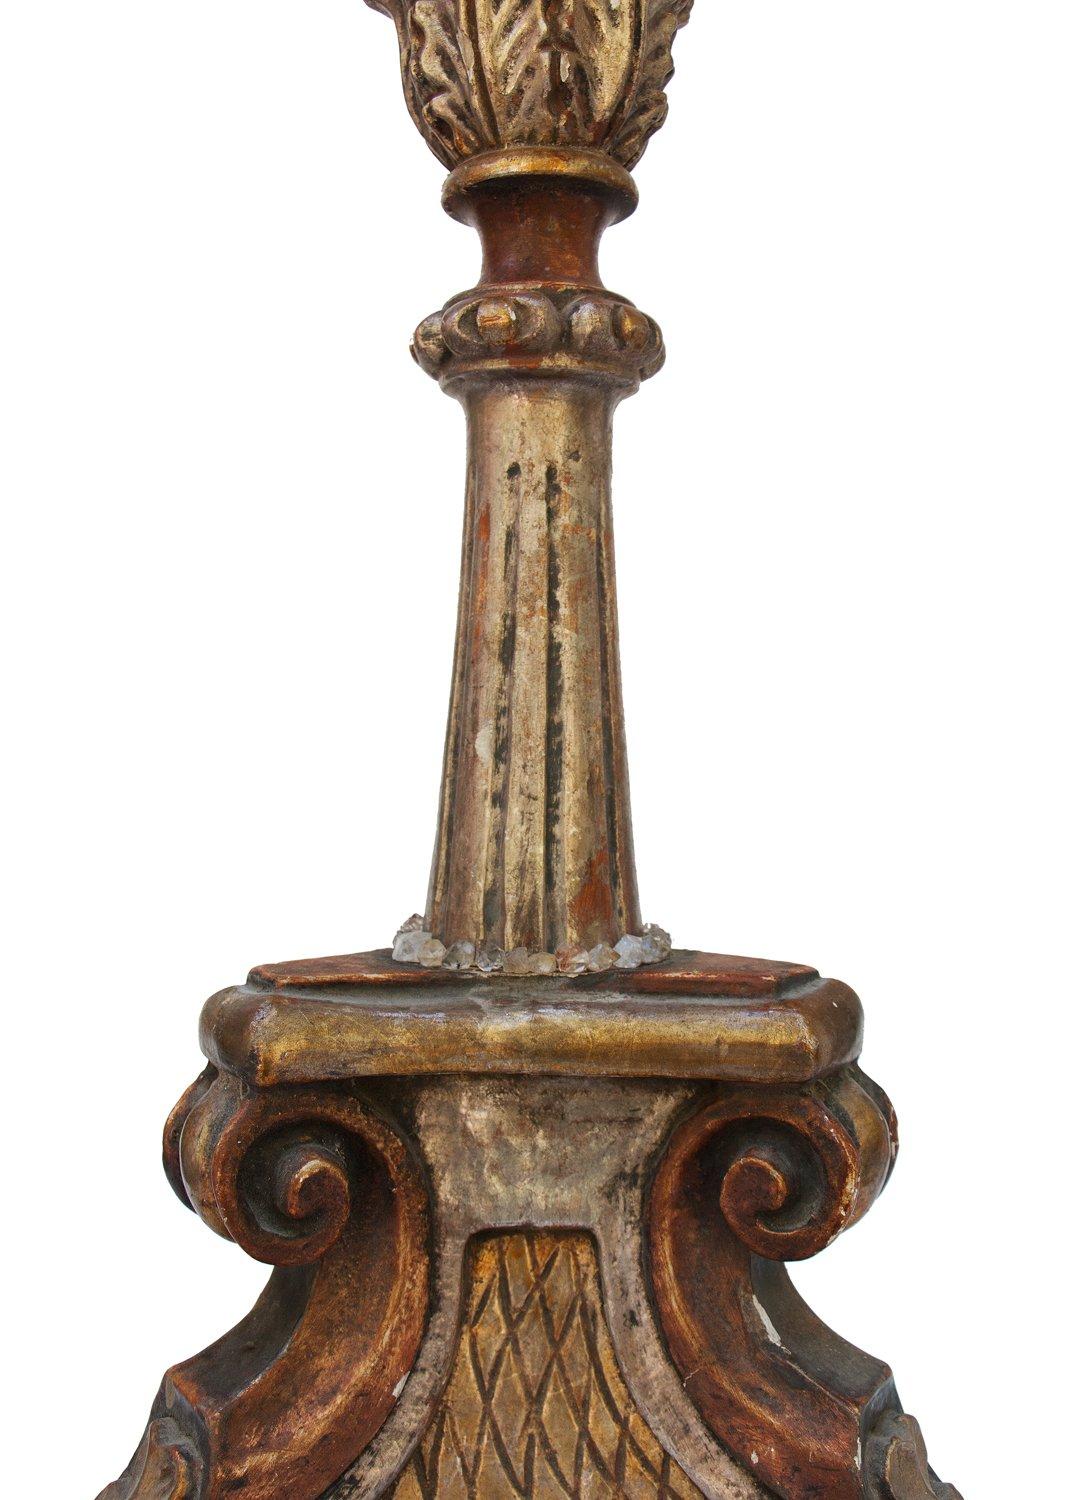 18th century Italian candlestick decorated with a smokey quartz crystal polished oblique point with coordinating smokey quartz crystals surrounding the point. The candlestick originally came from a church in the southern region of Tuscany. It has